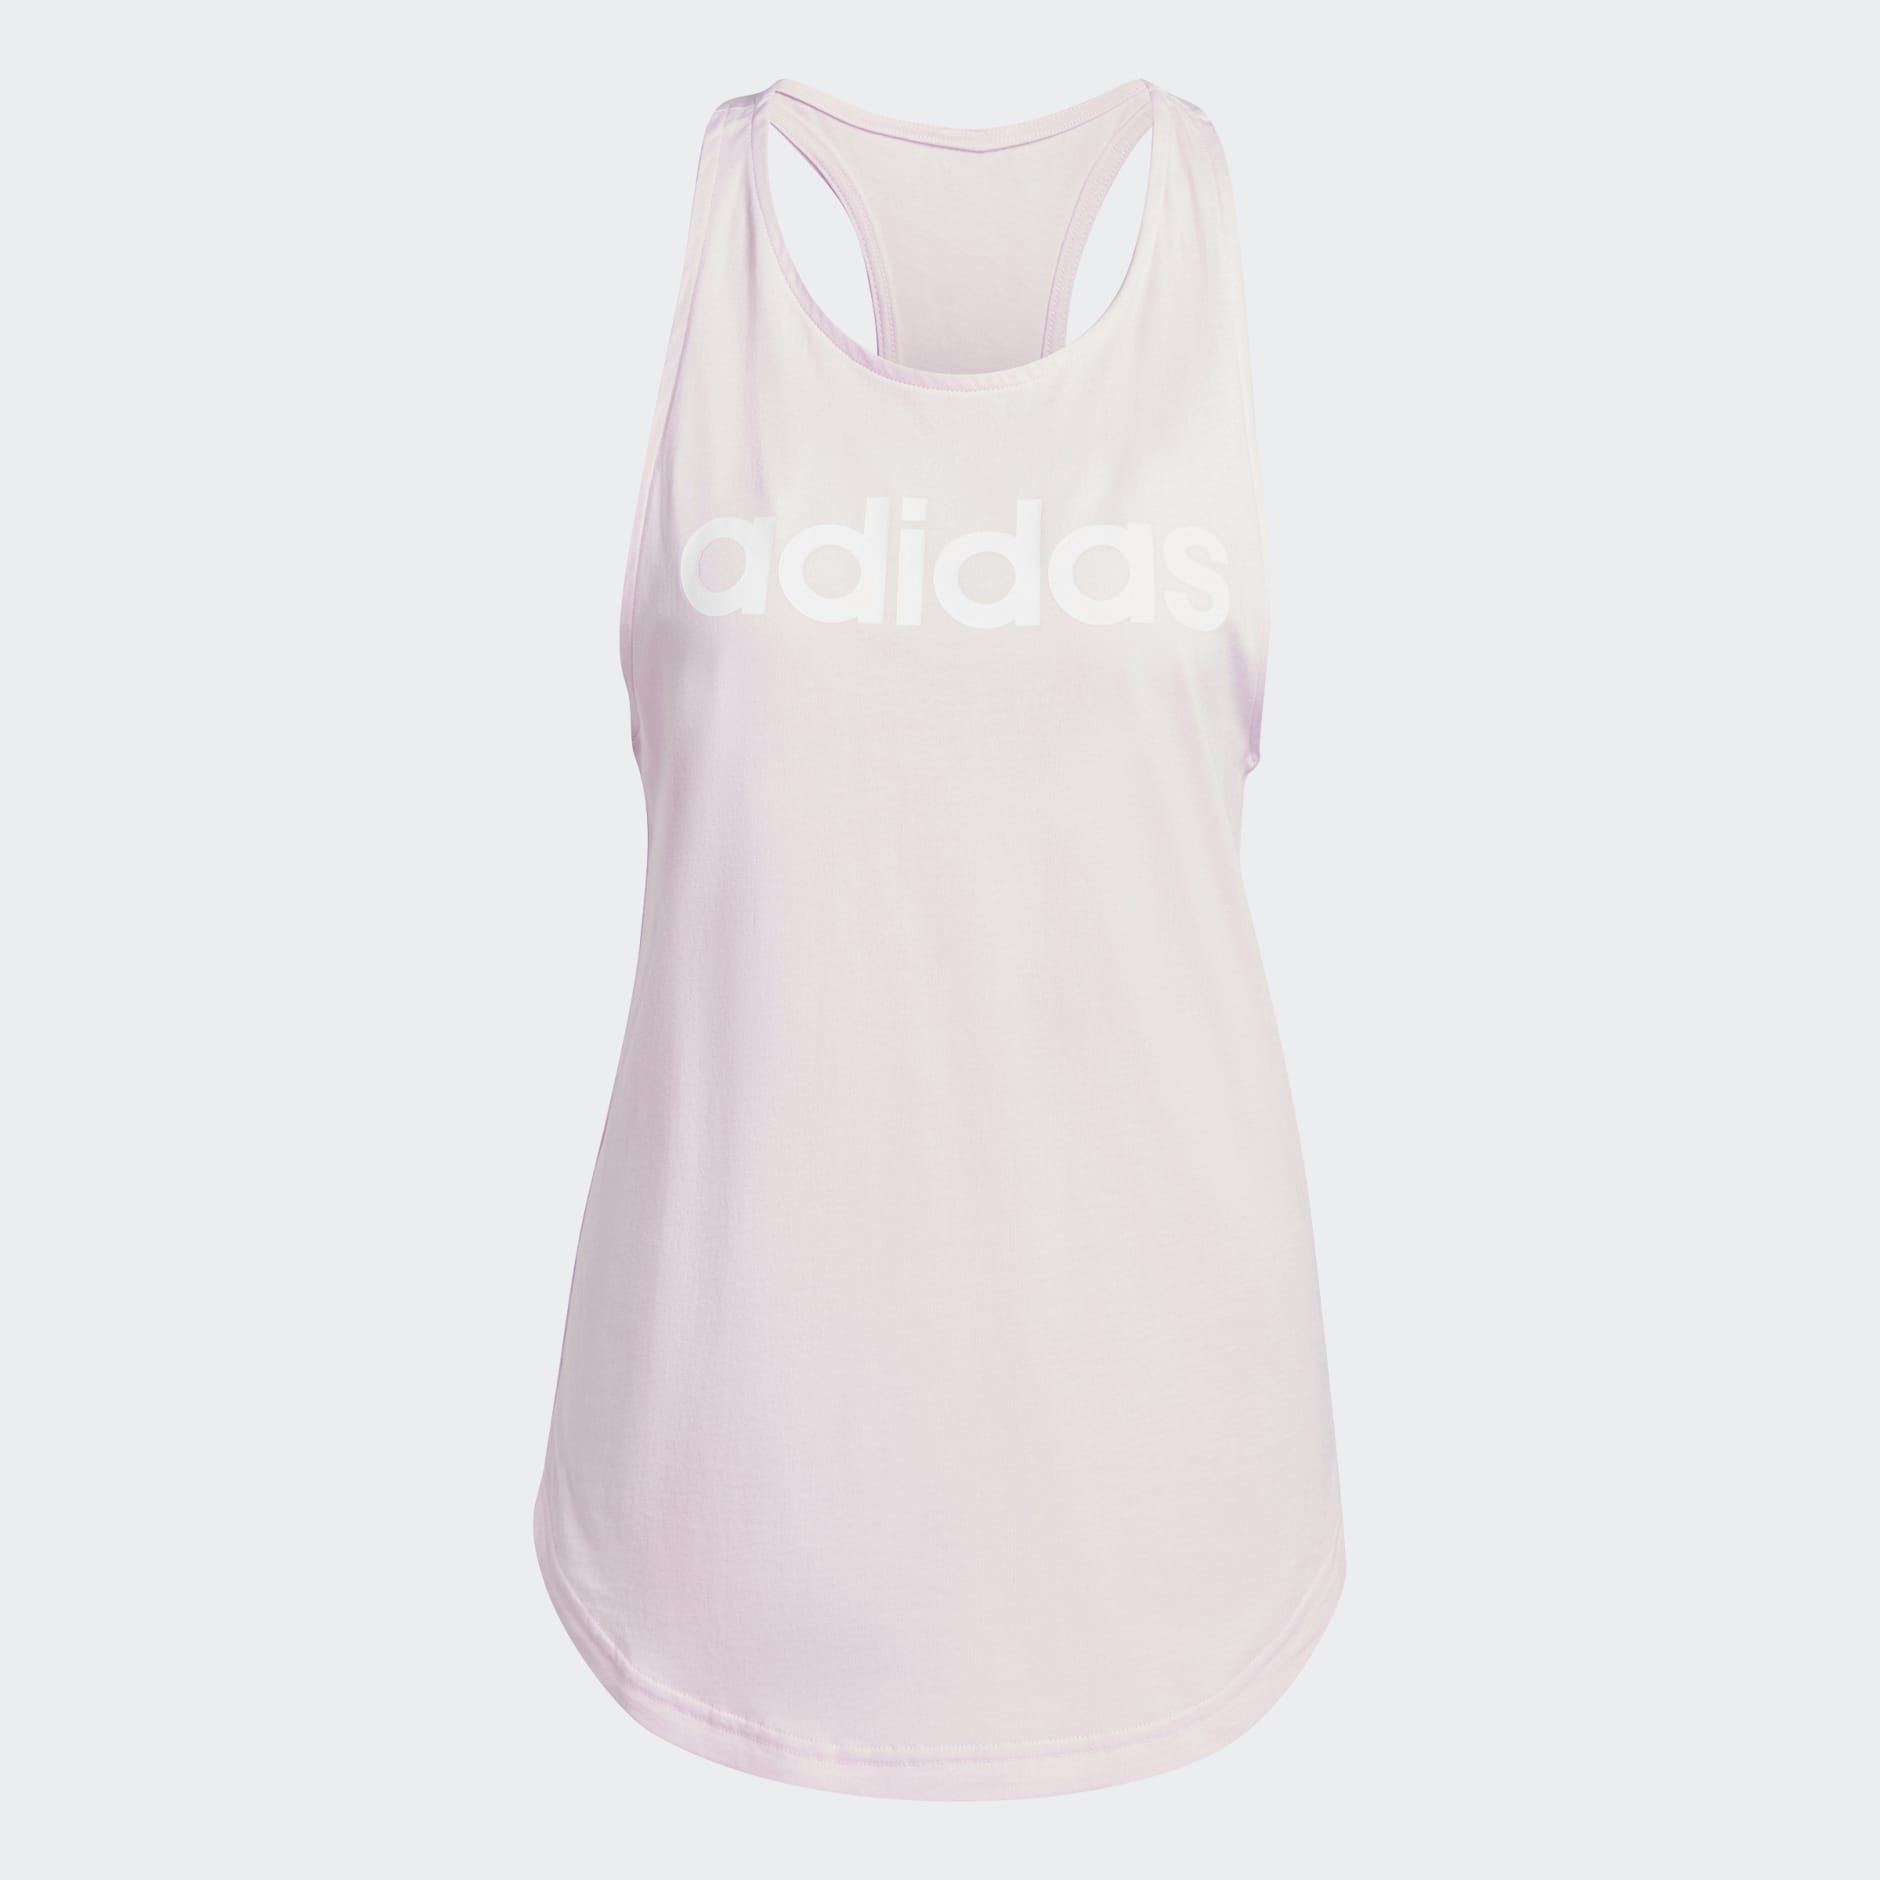 - ADIDAS Store FUTURE Fashion ADIDAS WINNERS TANK SPORTSWEAR TOP IC0510 - Your – 3.0 Online ICONS bCODE Retail